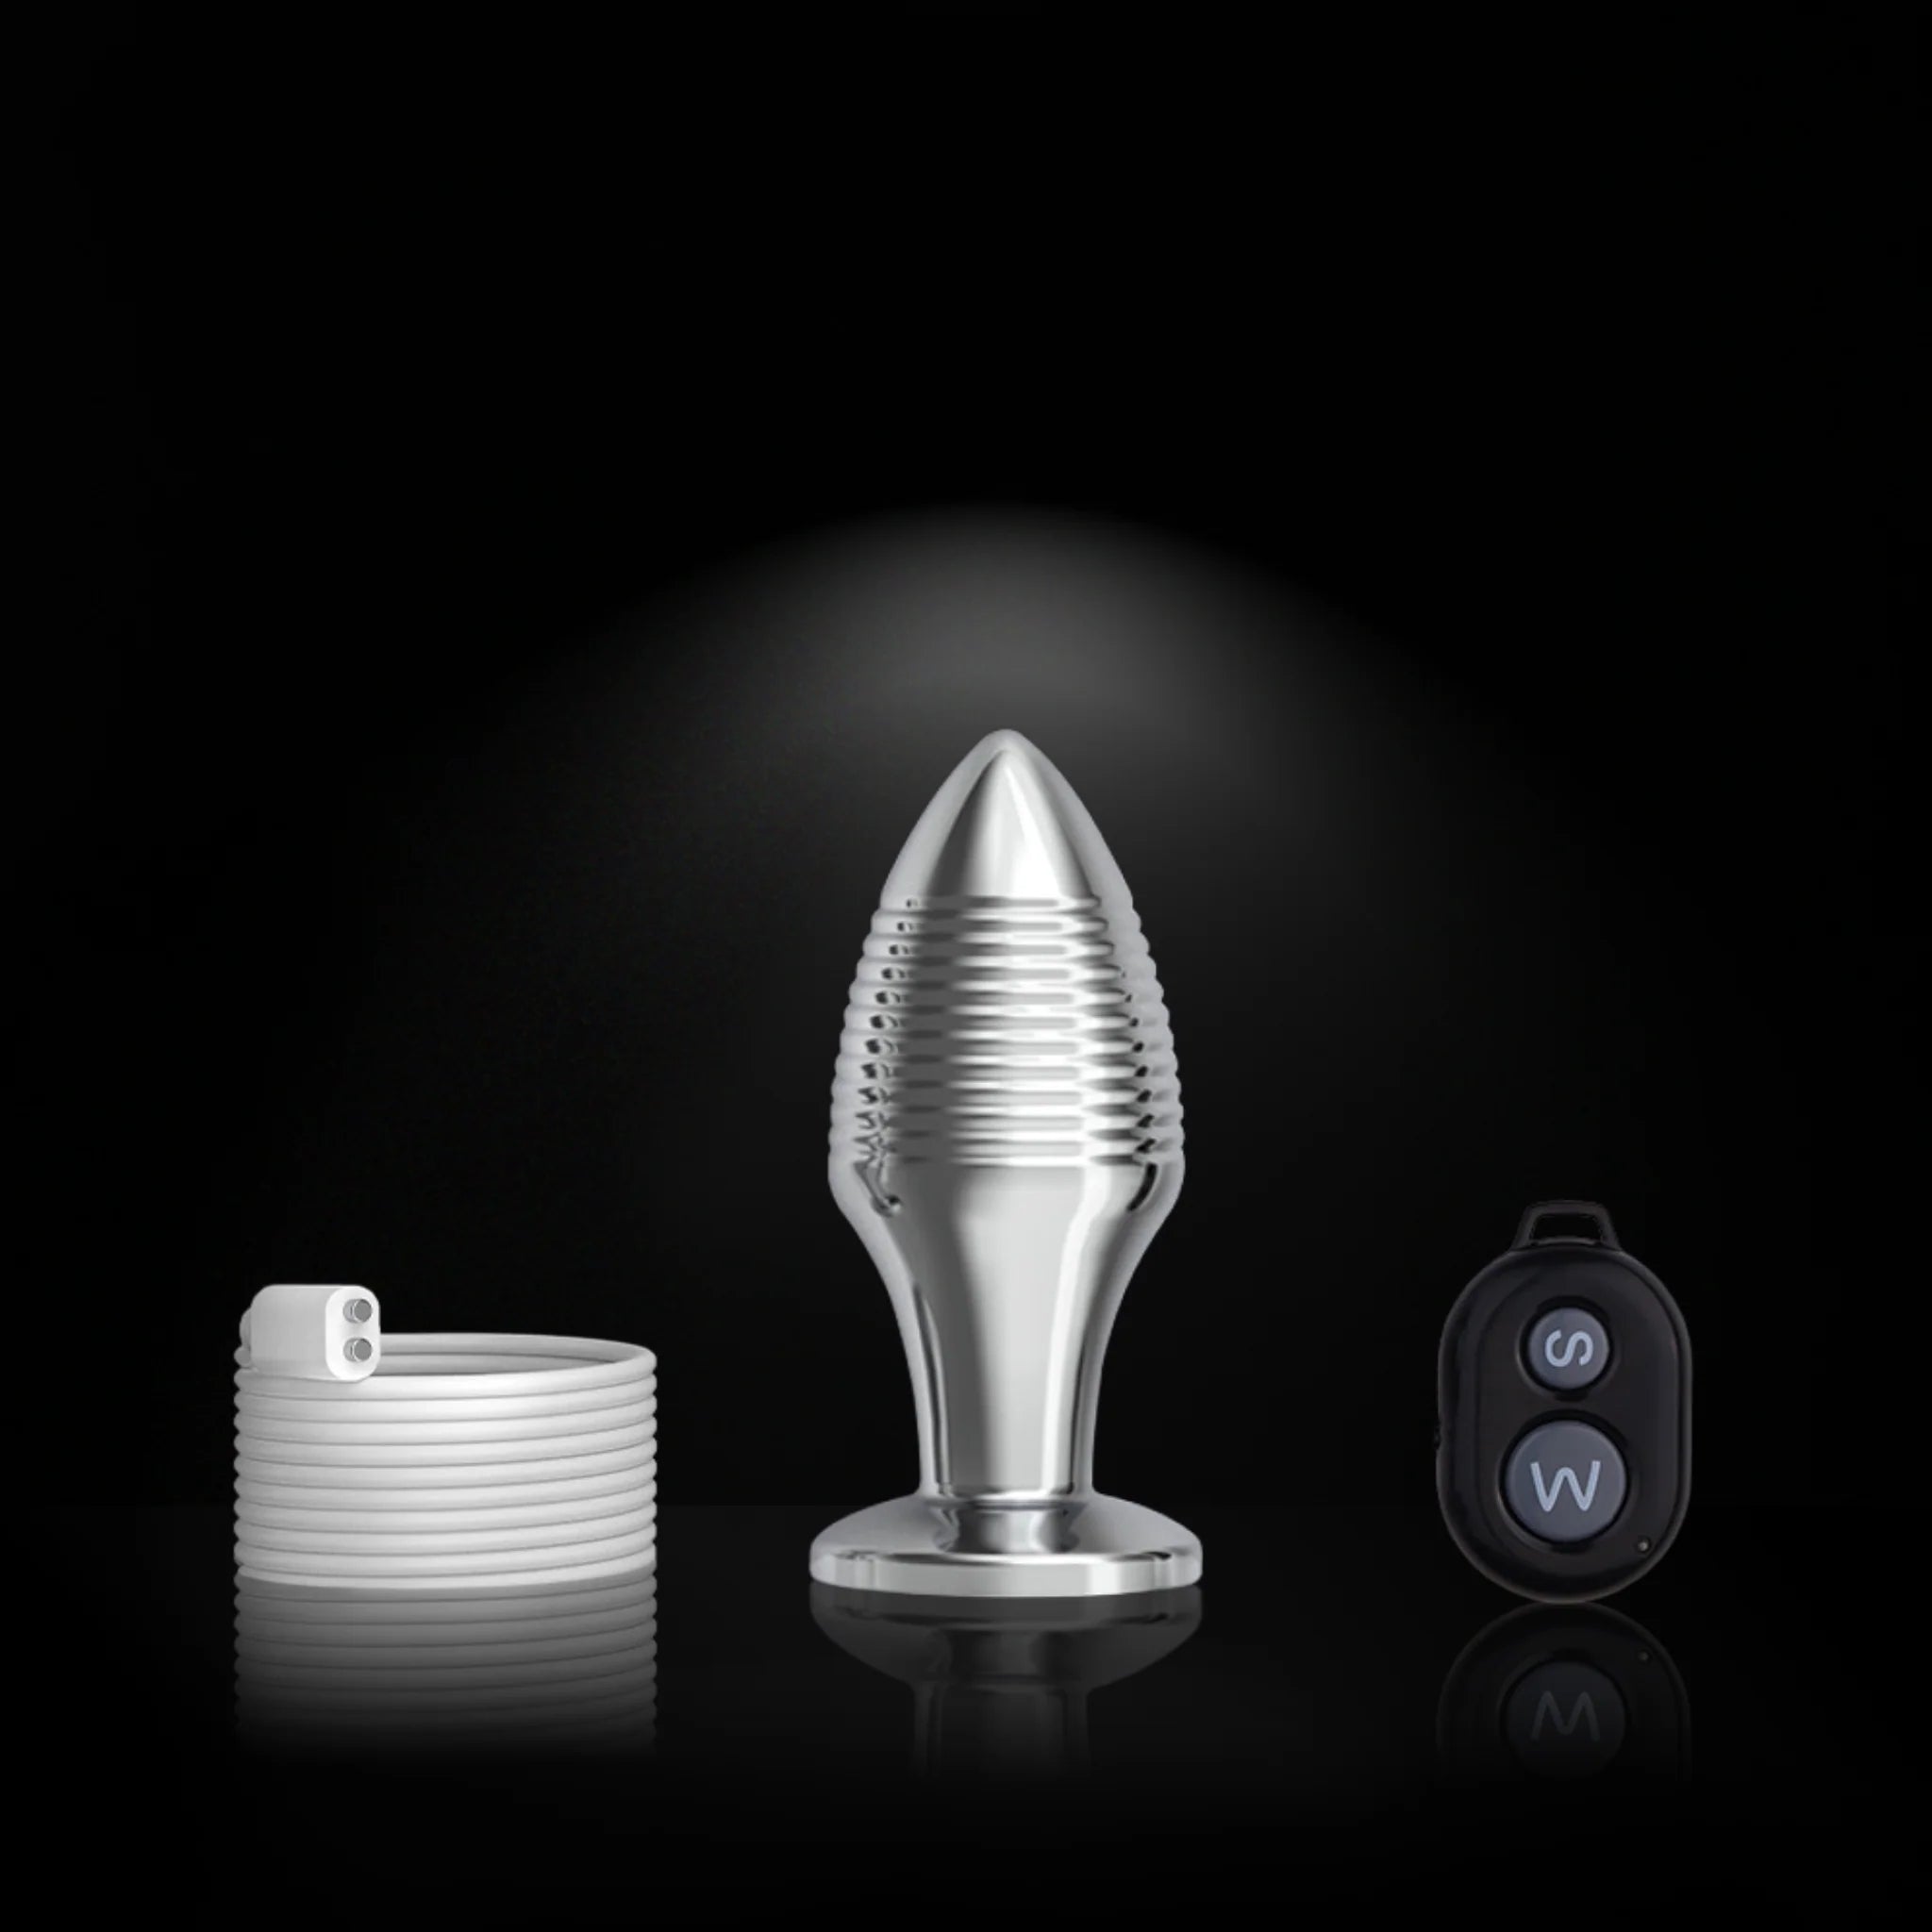 Tapered Temptation: The Vibrating Stainless Steel Anal Plug